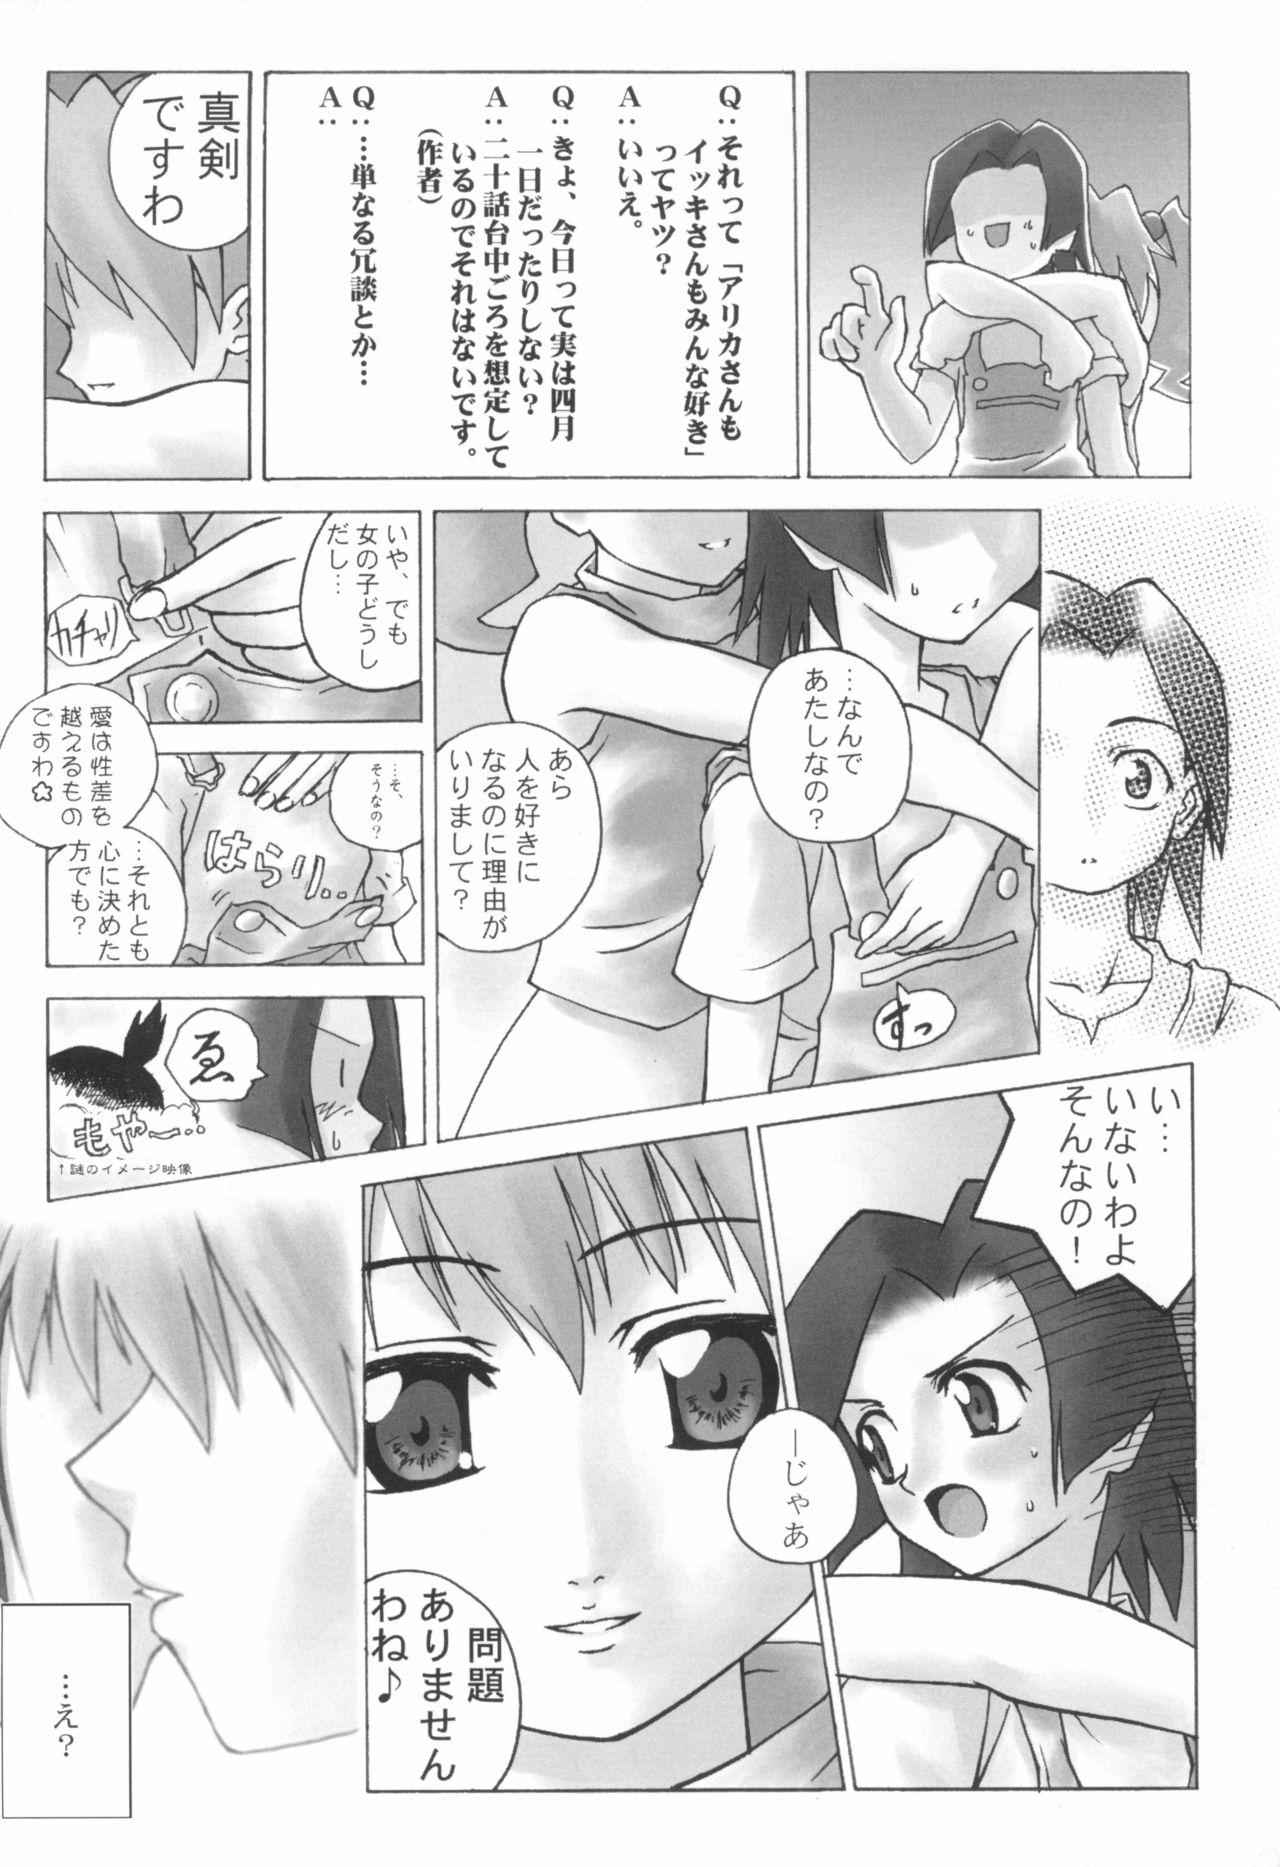 Slim NO RETURN - Medabots Old Young - Page 6